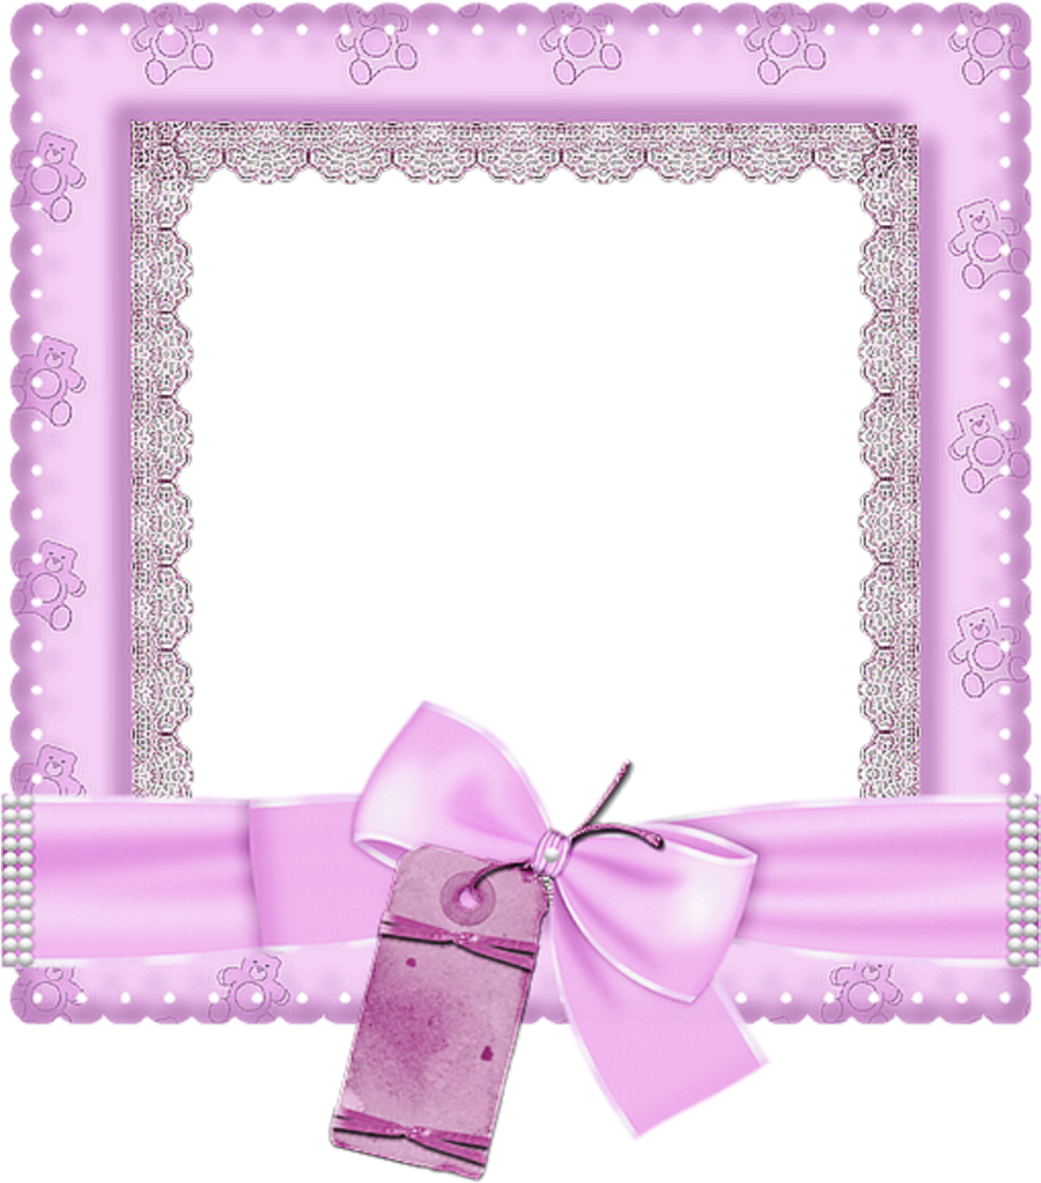 Pink Lace Framewith Bow